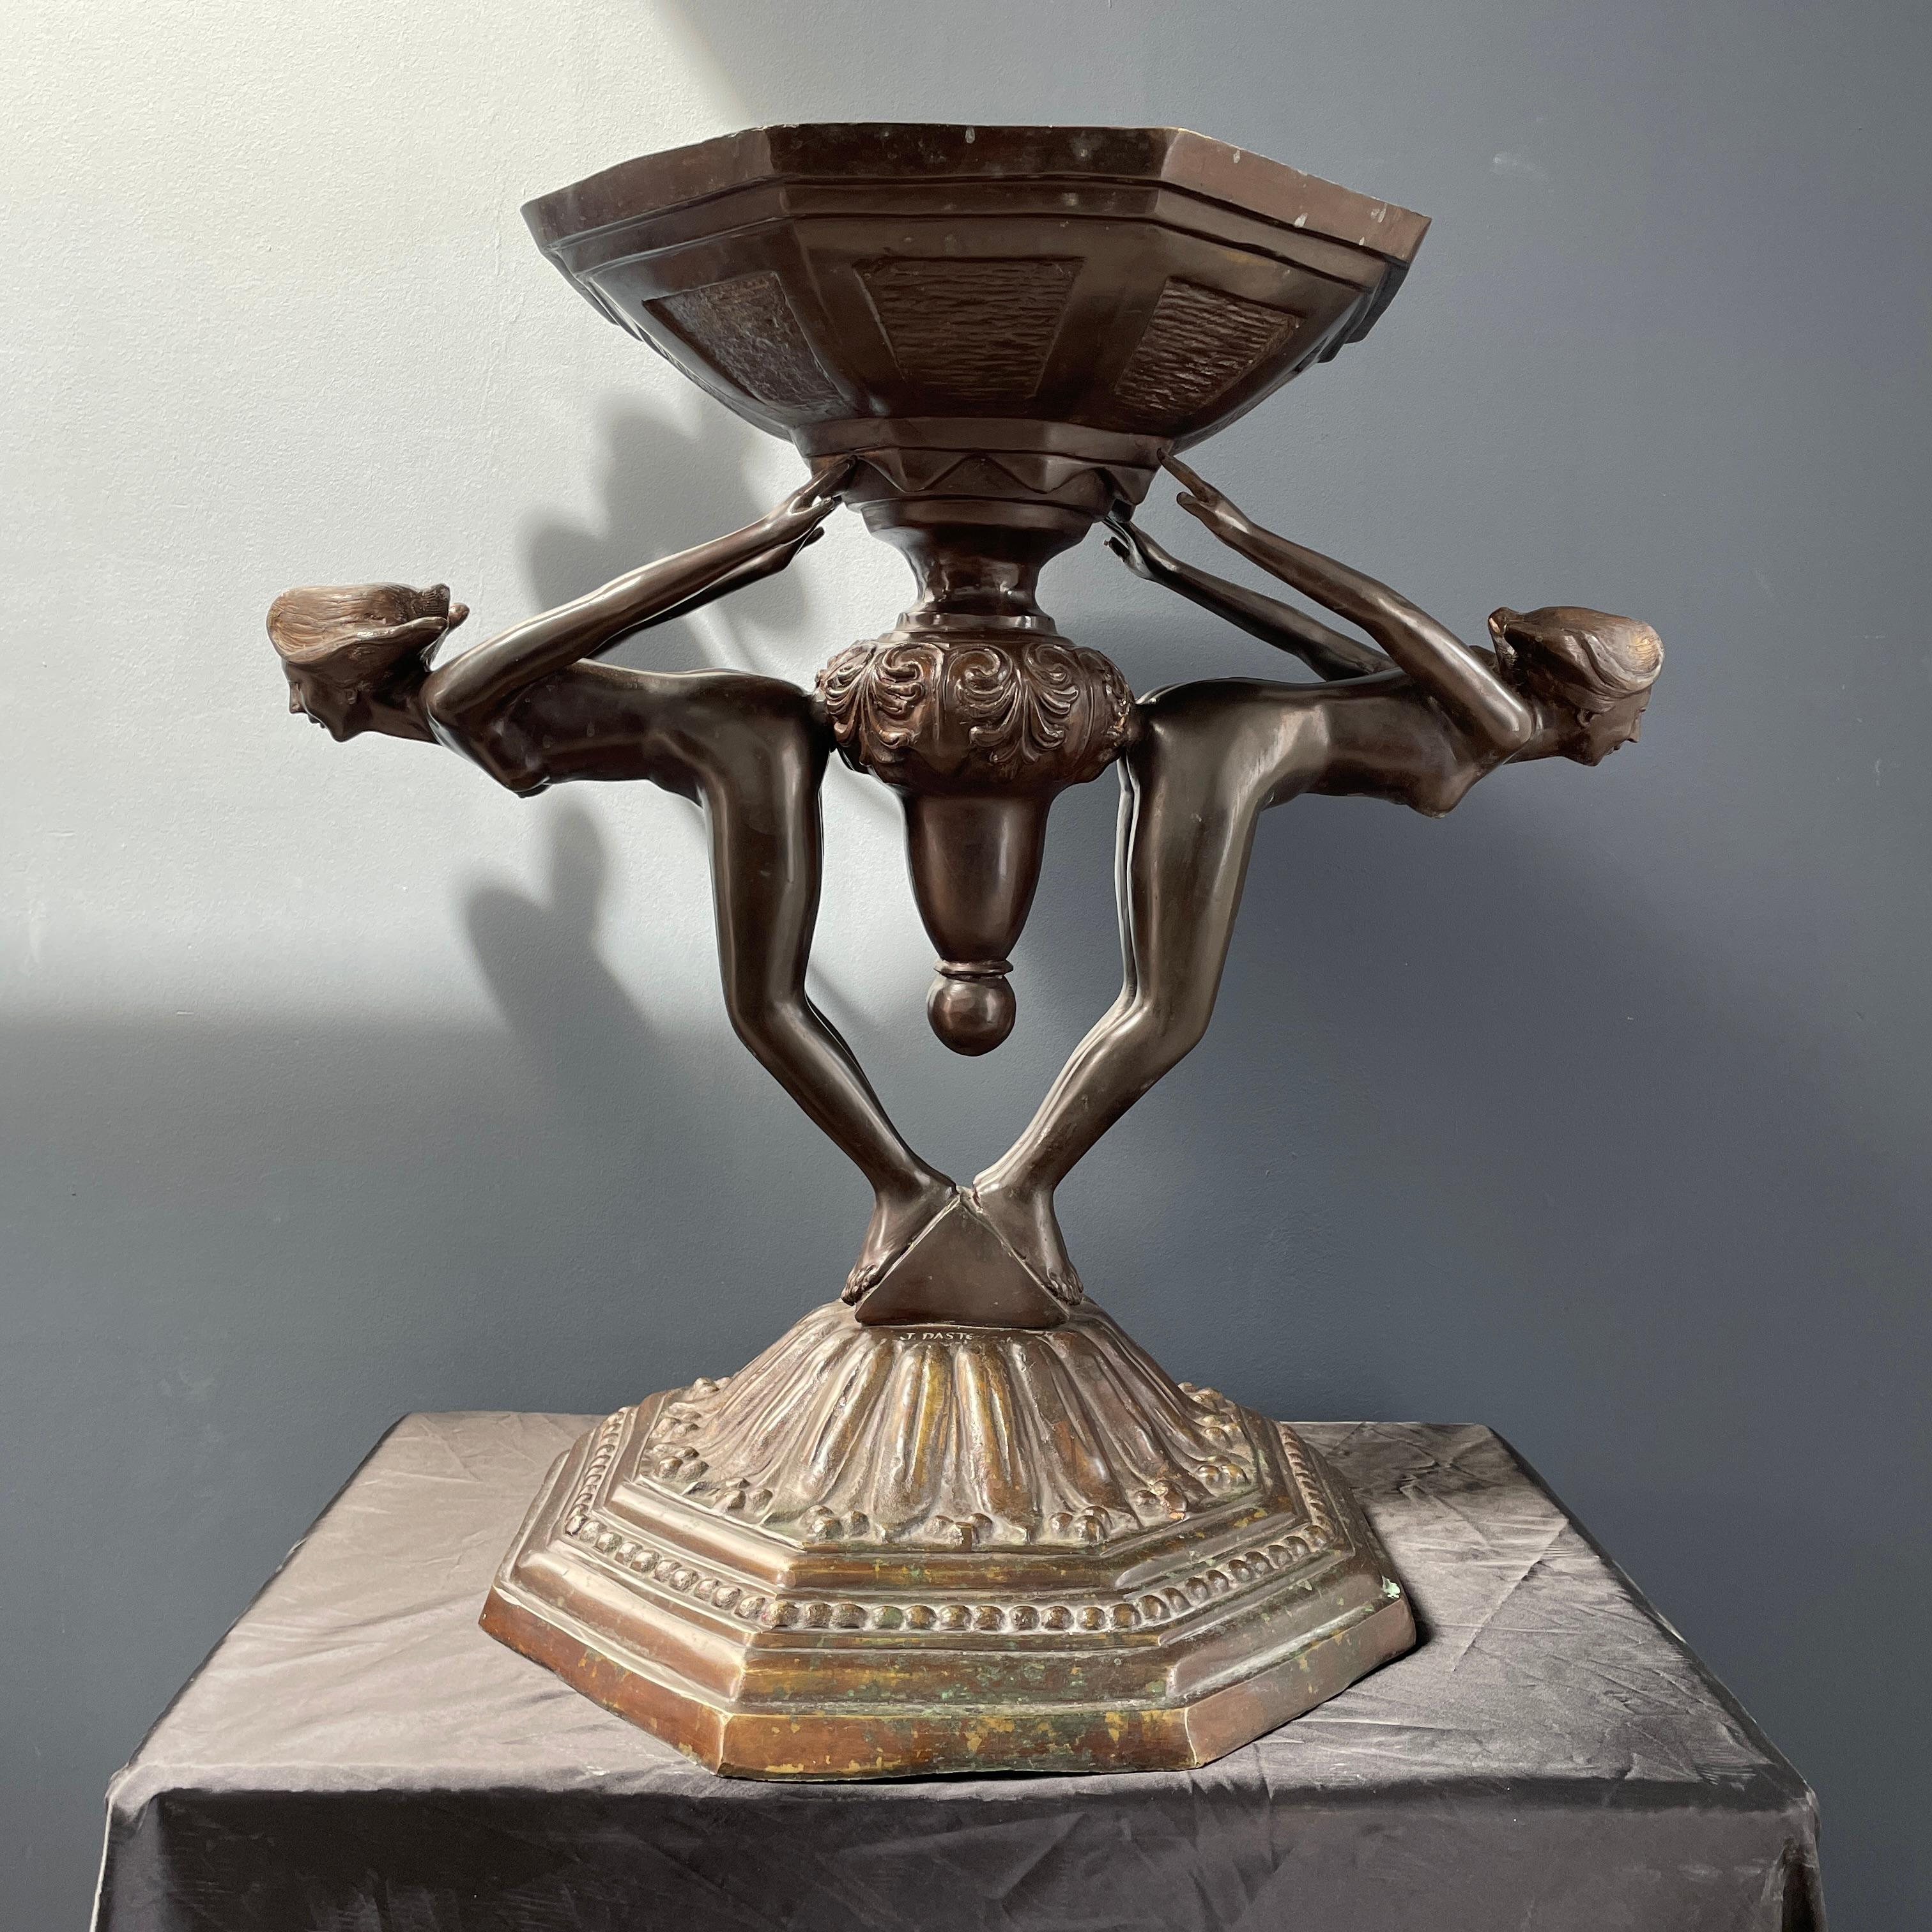 Stunning Art Deco bronze sculpture bird bath by listed artist Joseph (Guiseppe) d'Aste, c. 1920's - 30's. The heavily stylized design features 2 beautiful nudes in diving stance on a decorative base, with tiered tapered hexagonal bowl above. The